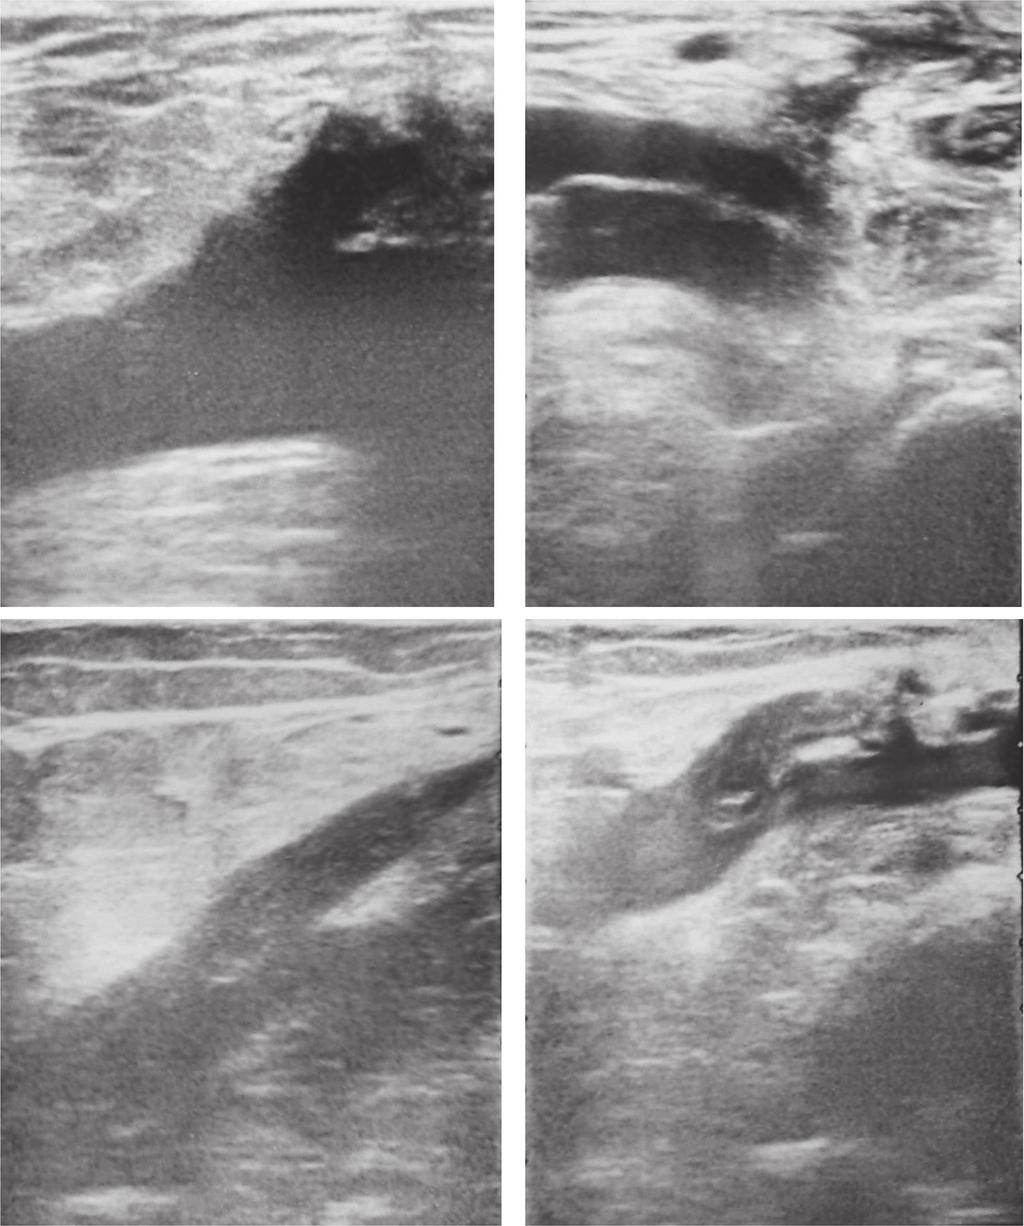 Thrombosis of the Saphenous Vein Stump Fig. 1 (A) Saphenous stump without thrombus. (B) Class 1: Saphenous stump with thrombus not extending into deep vein.